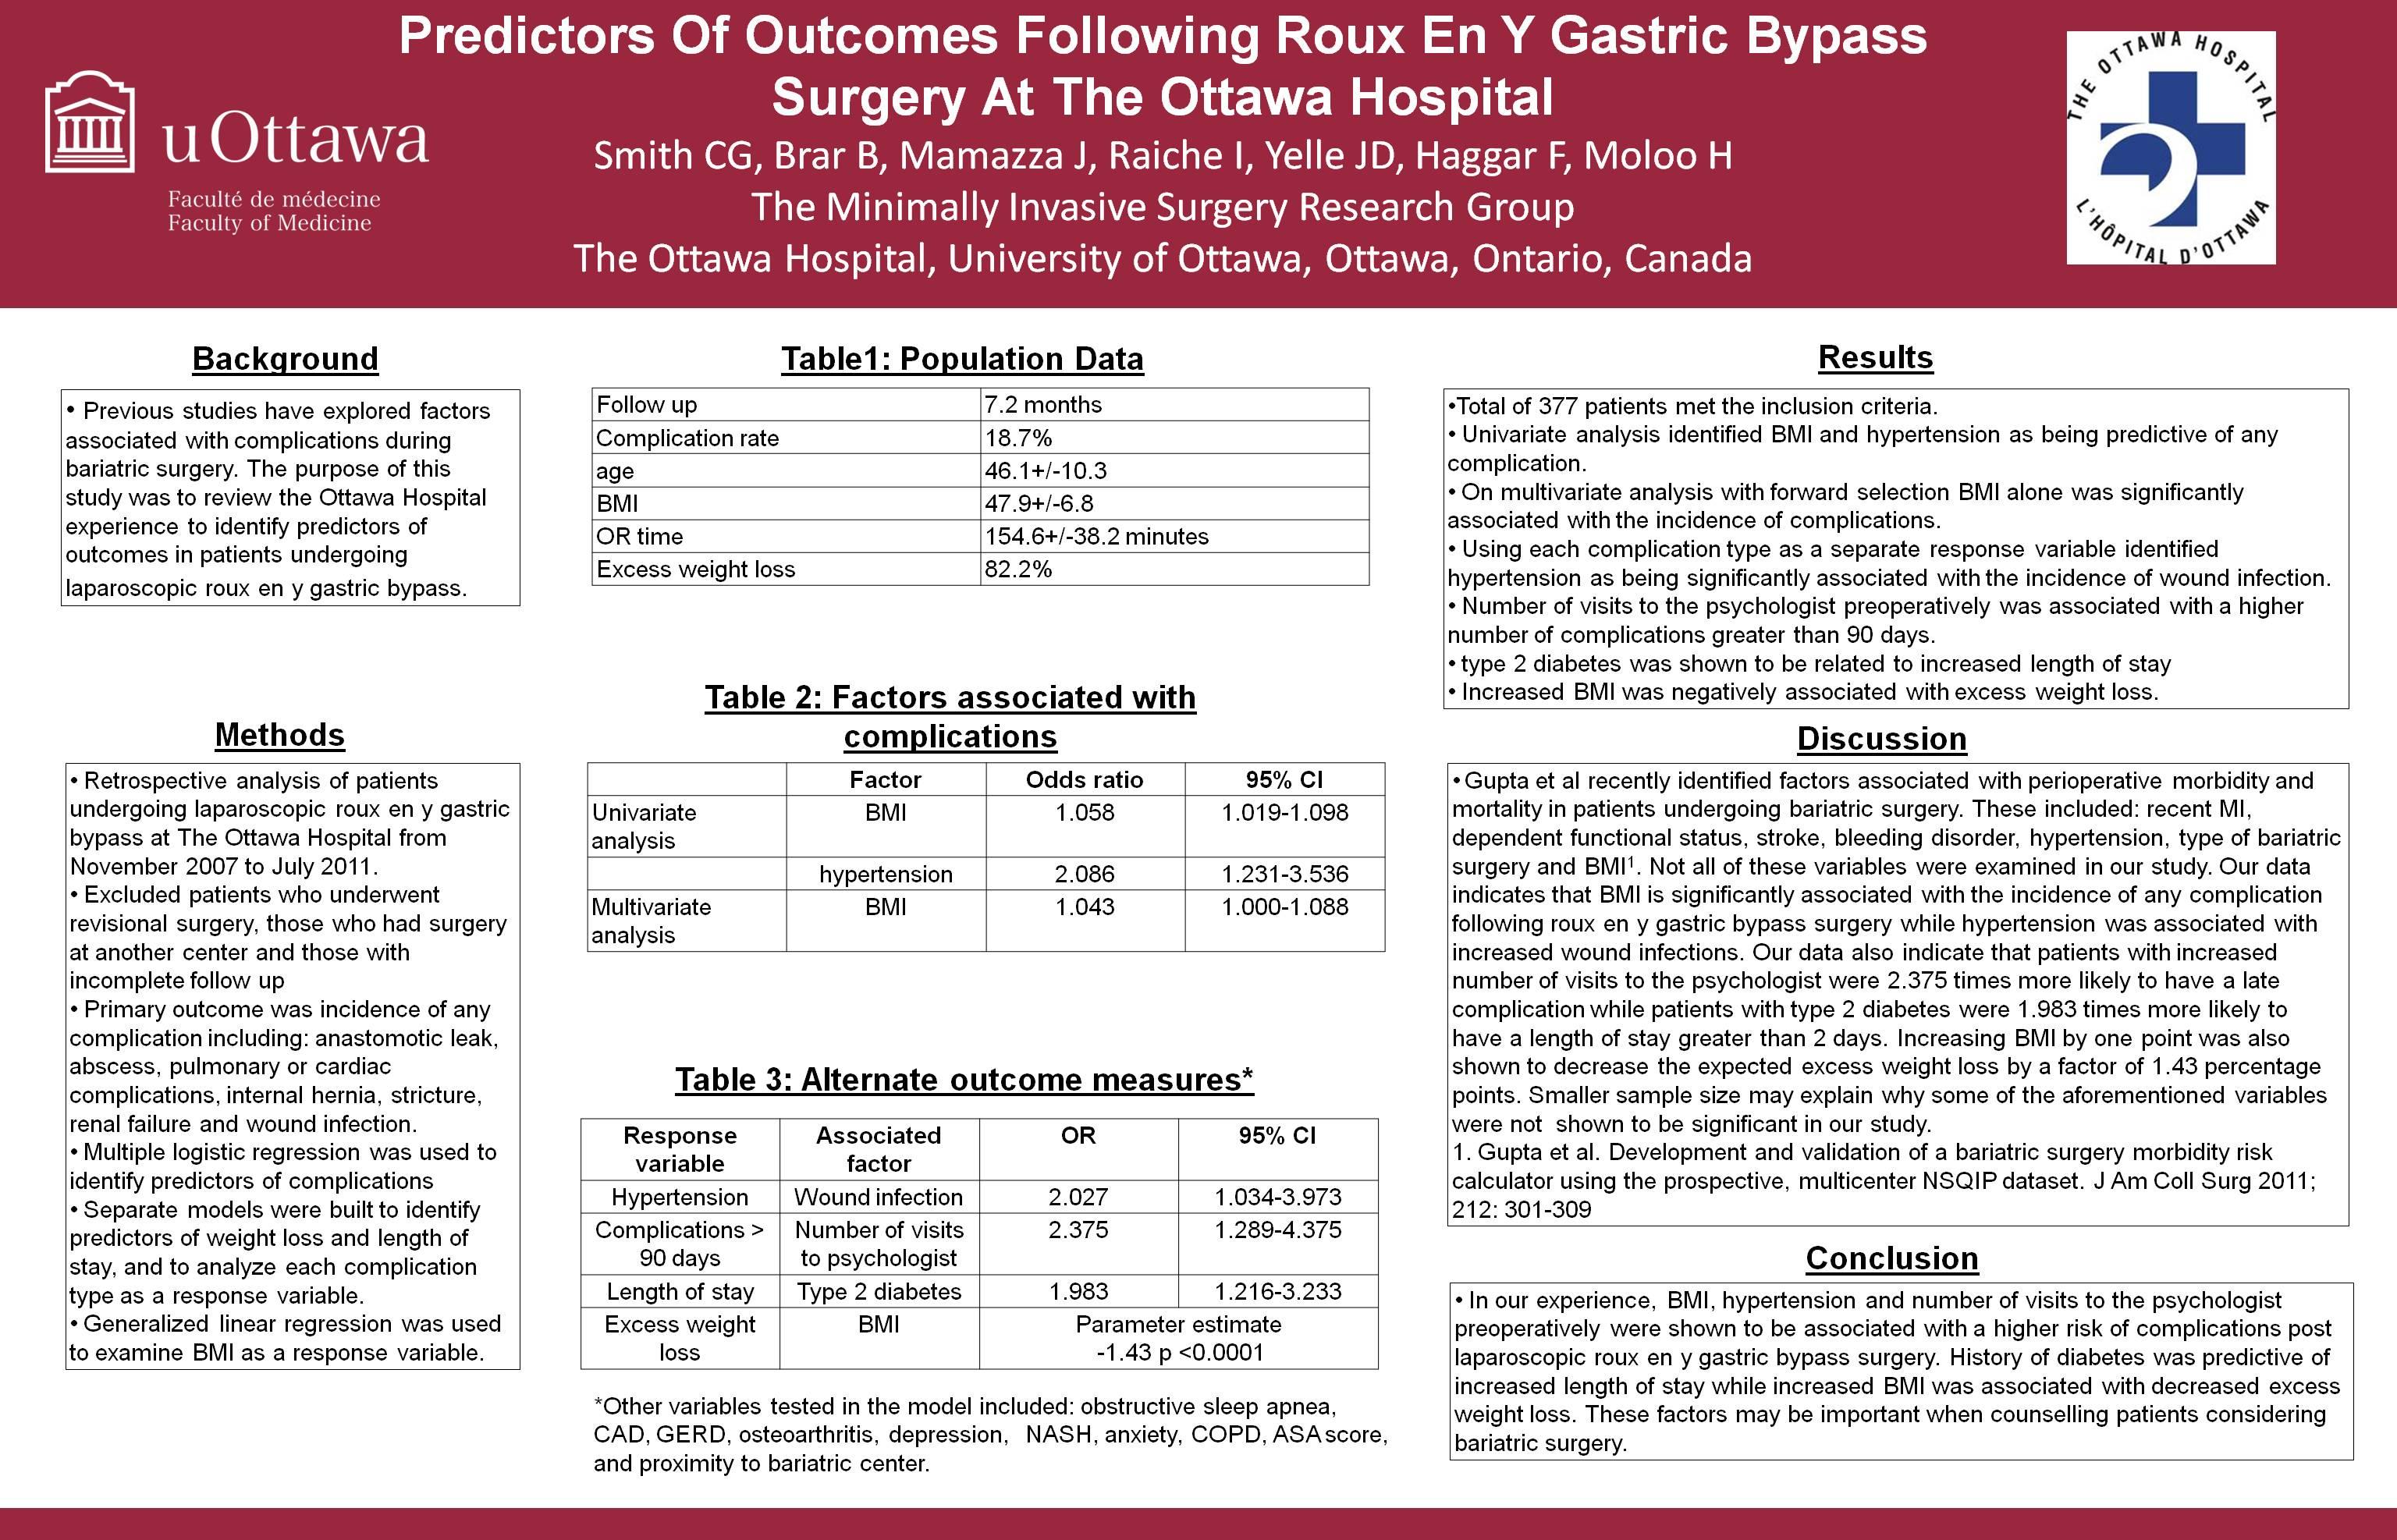 Predictors Of Outcomes Following Roux En Y Gastric Bypass Surgery